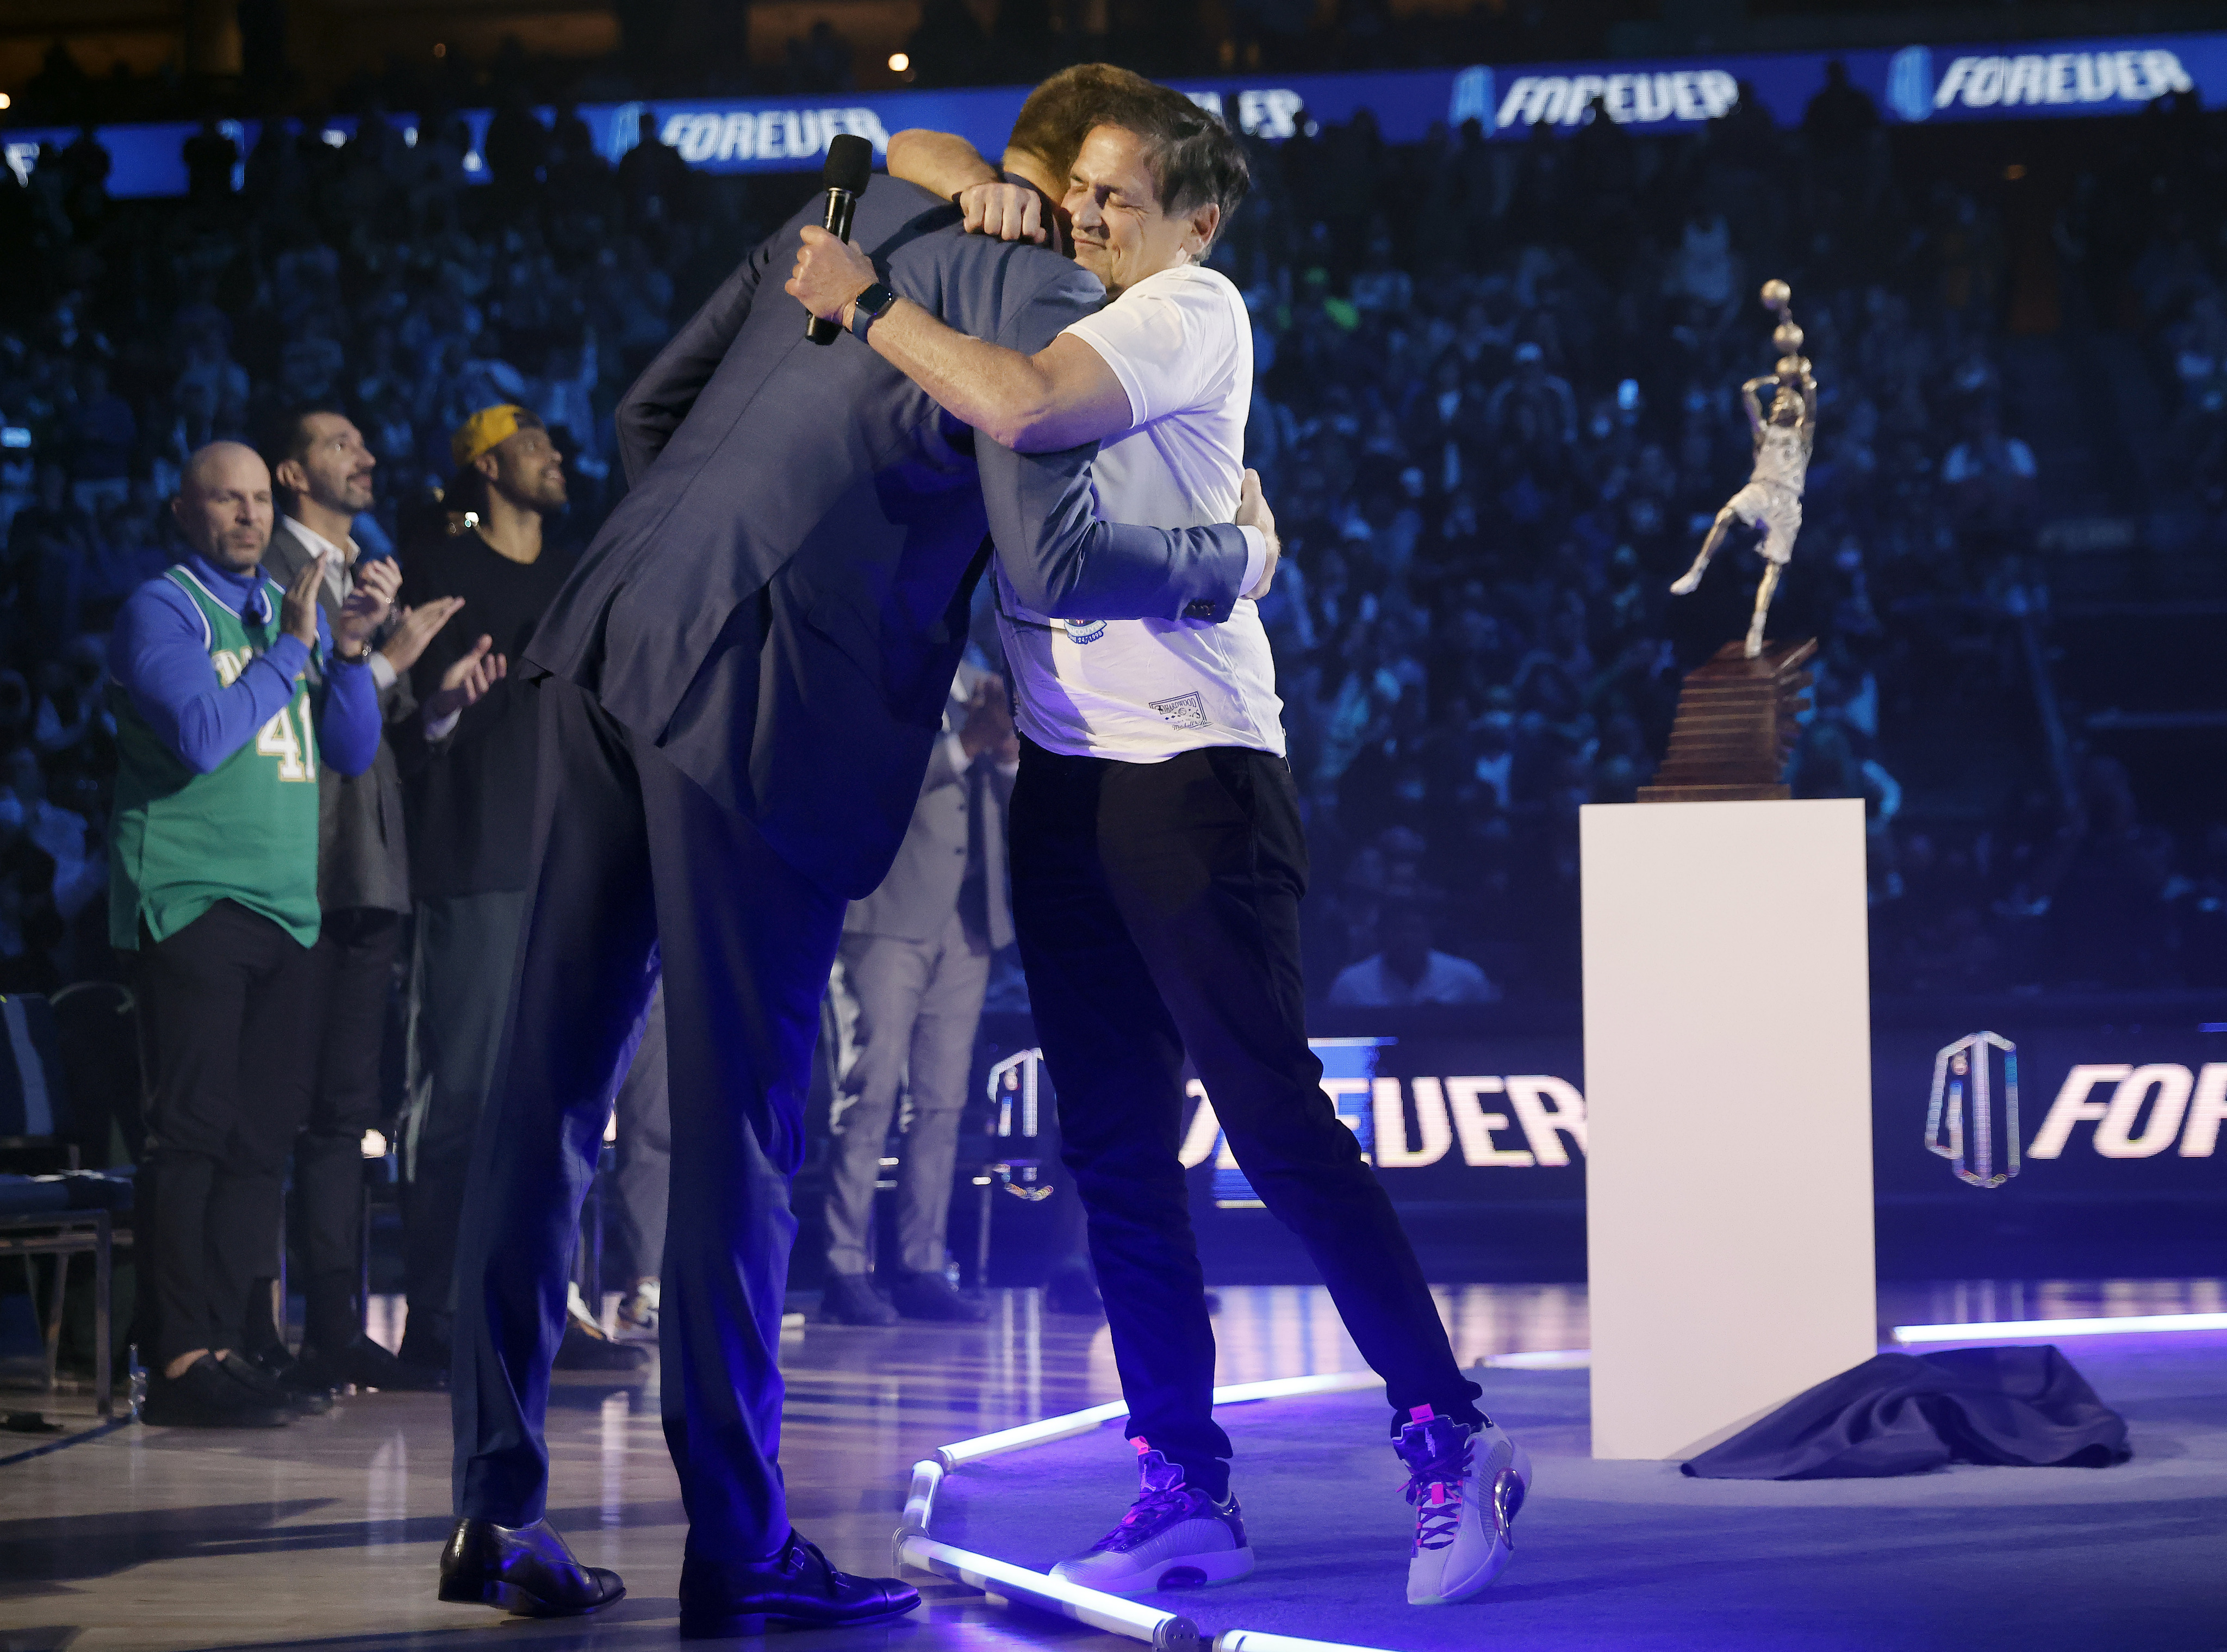 41 Forever: The beautiful ceremony of Dirk Nowitzki's number retirement